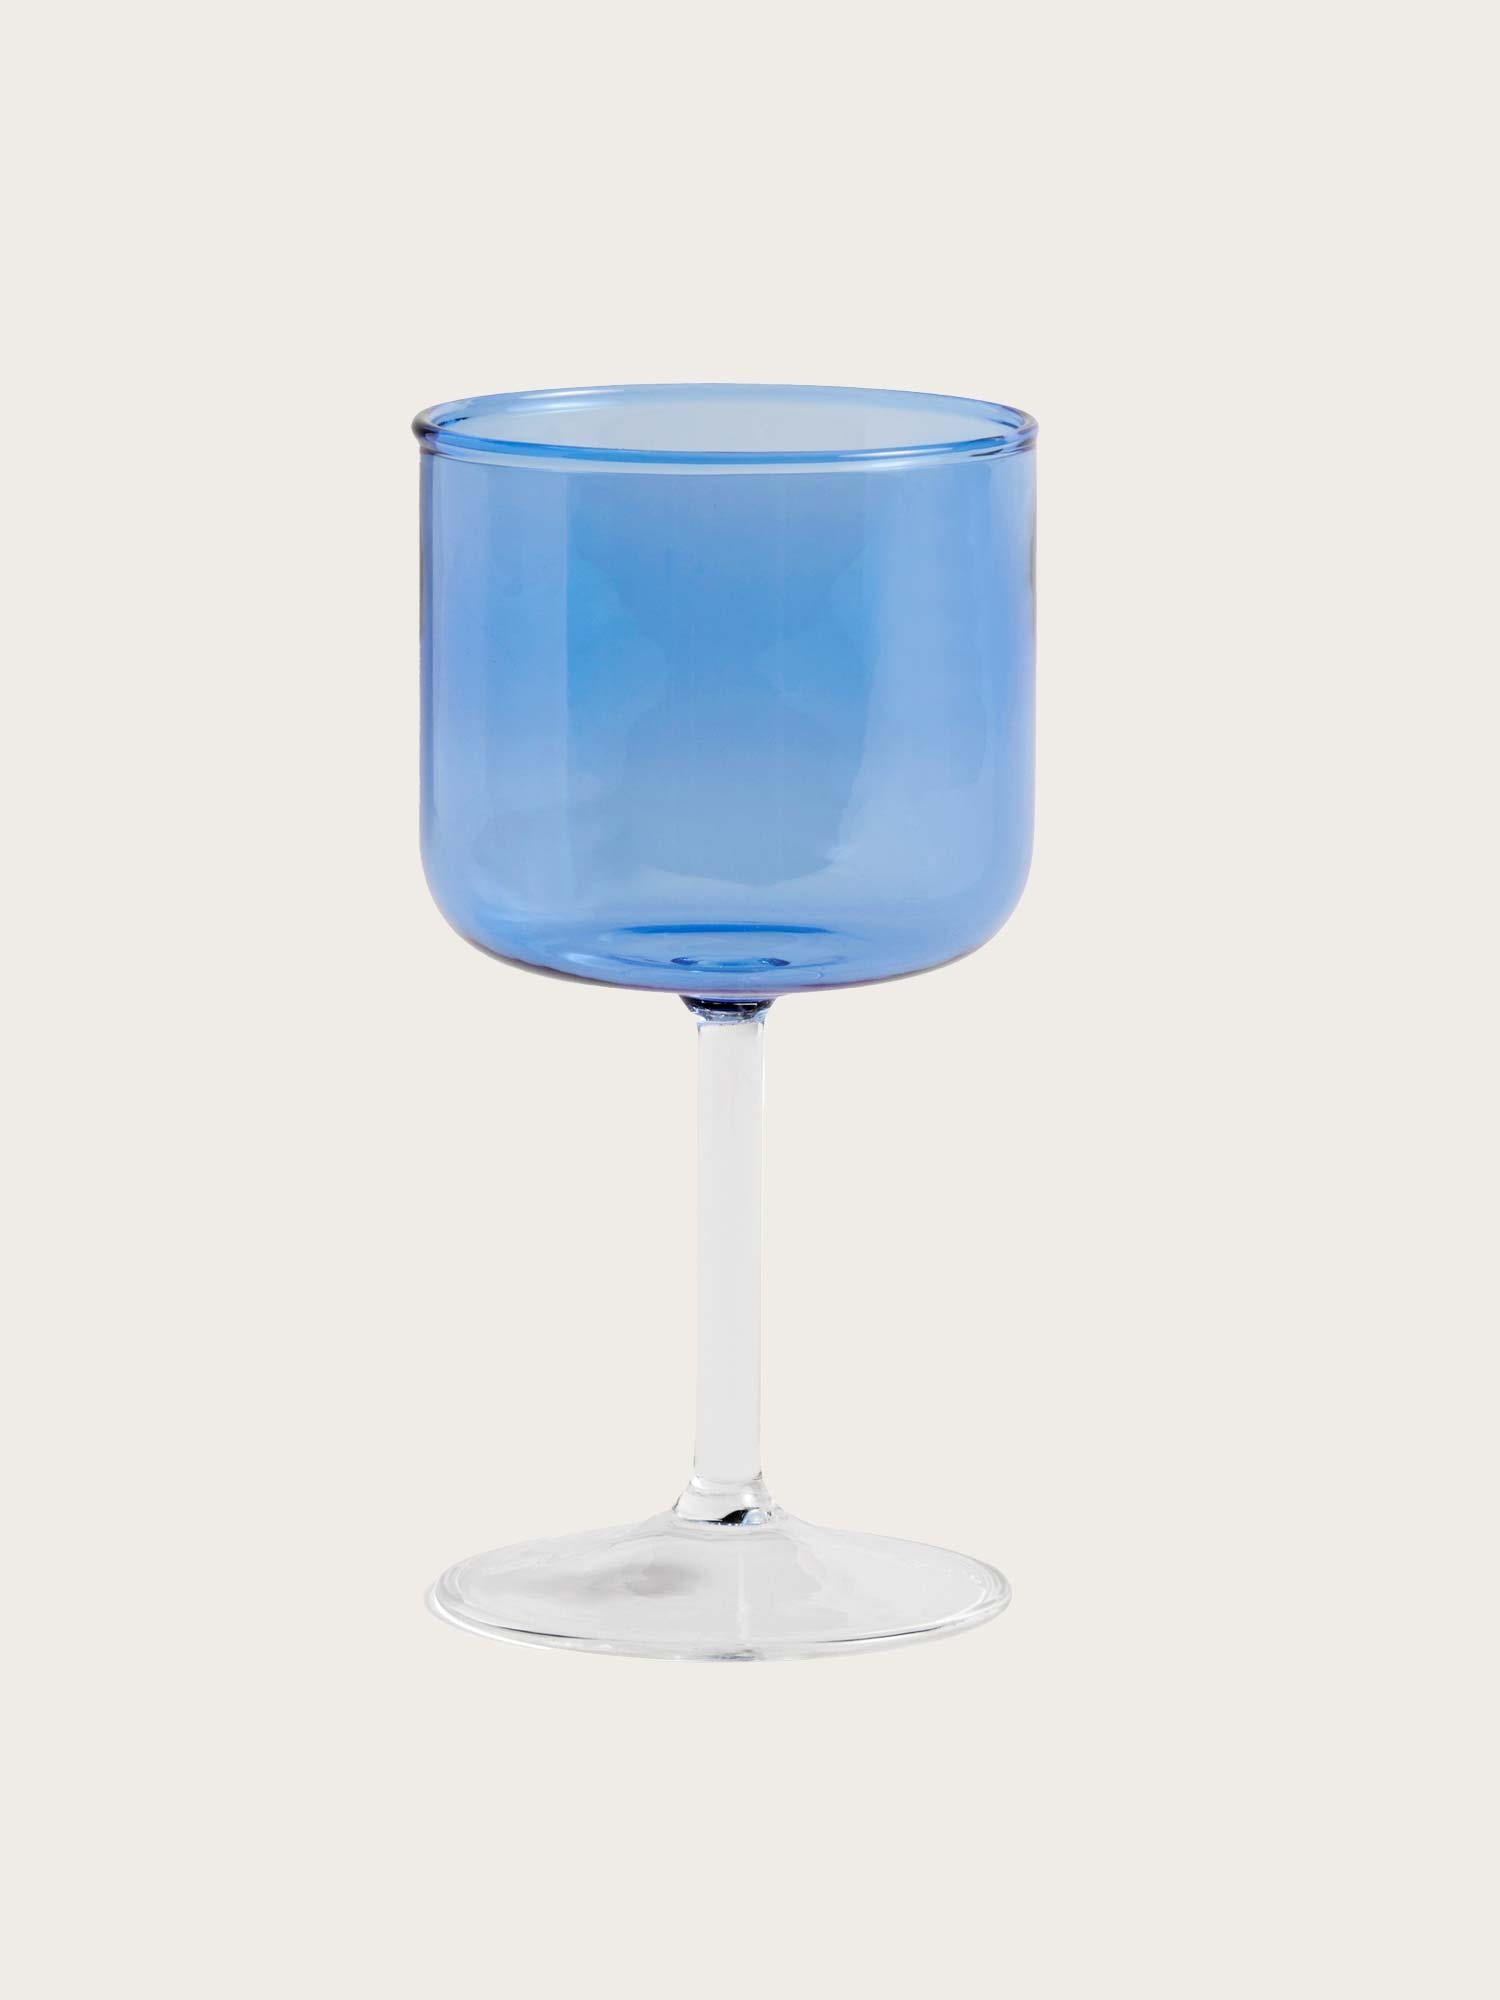 Tint Wine Glass - Set of 2 - Blue and Clear